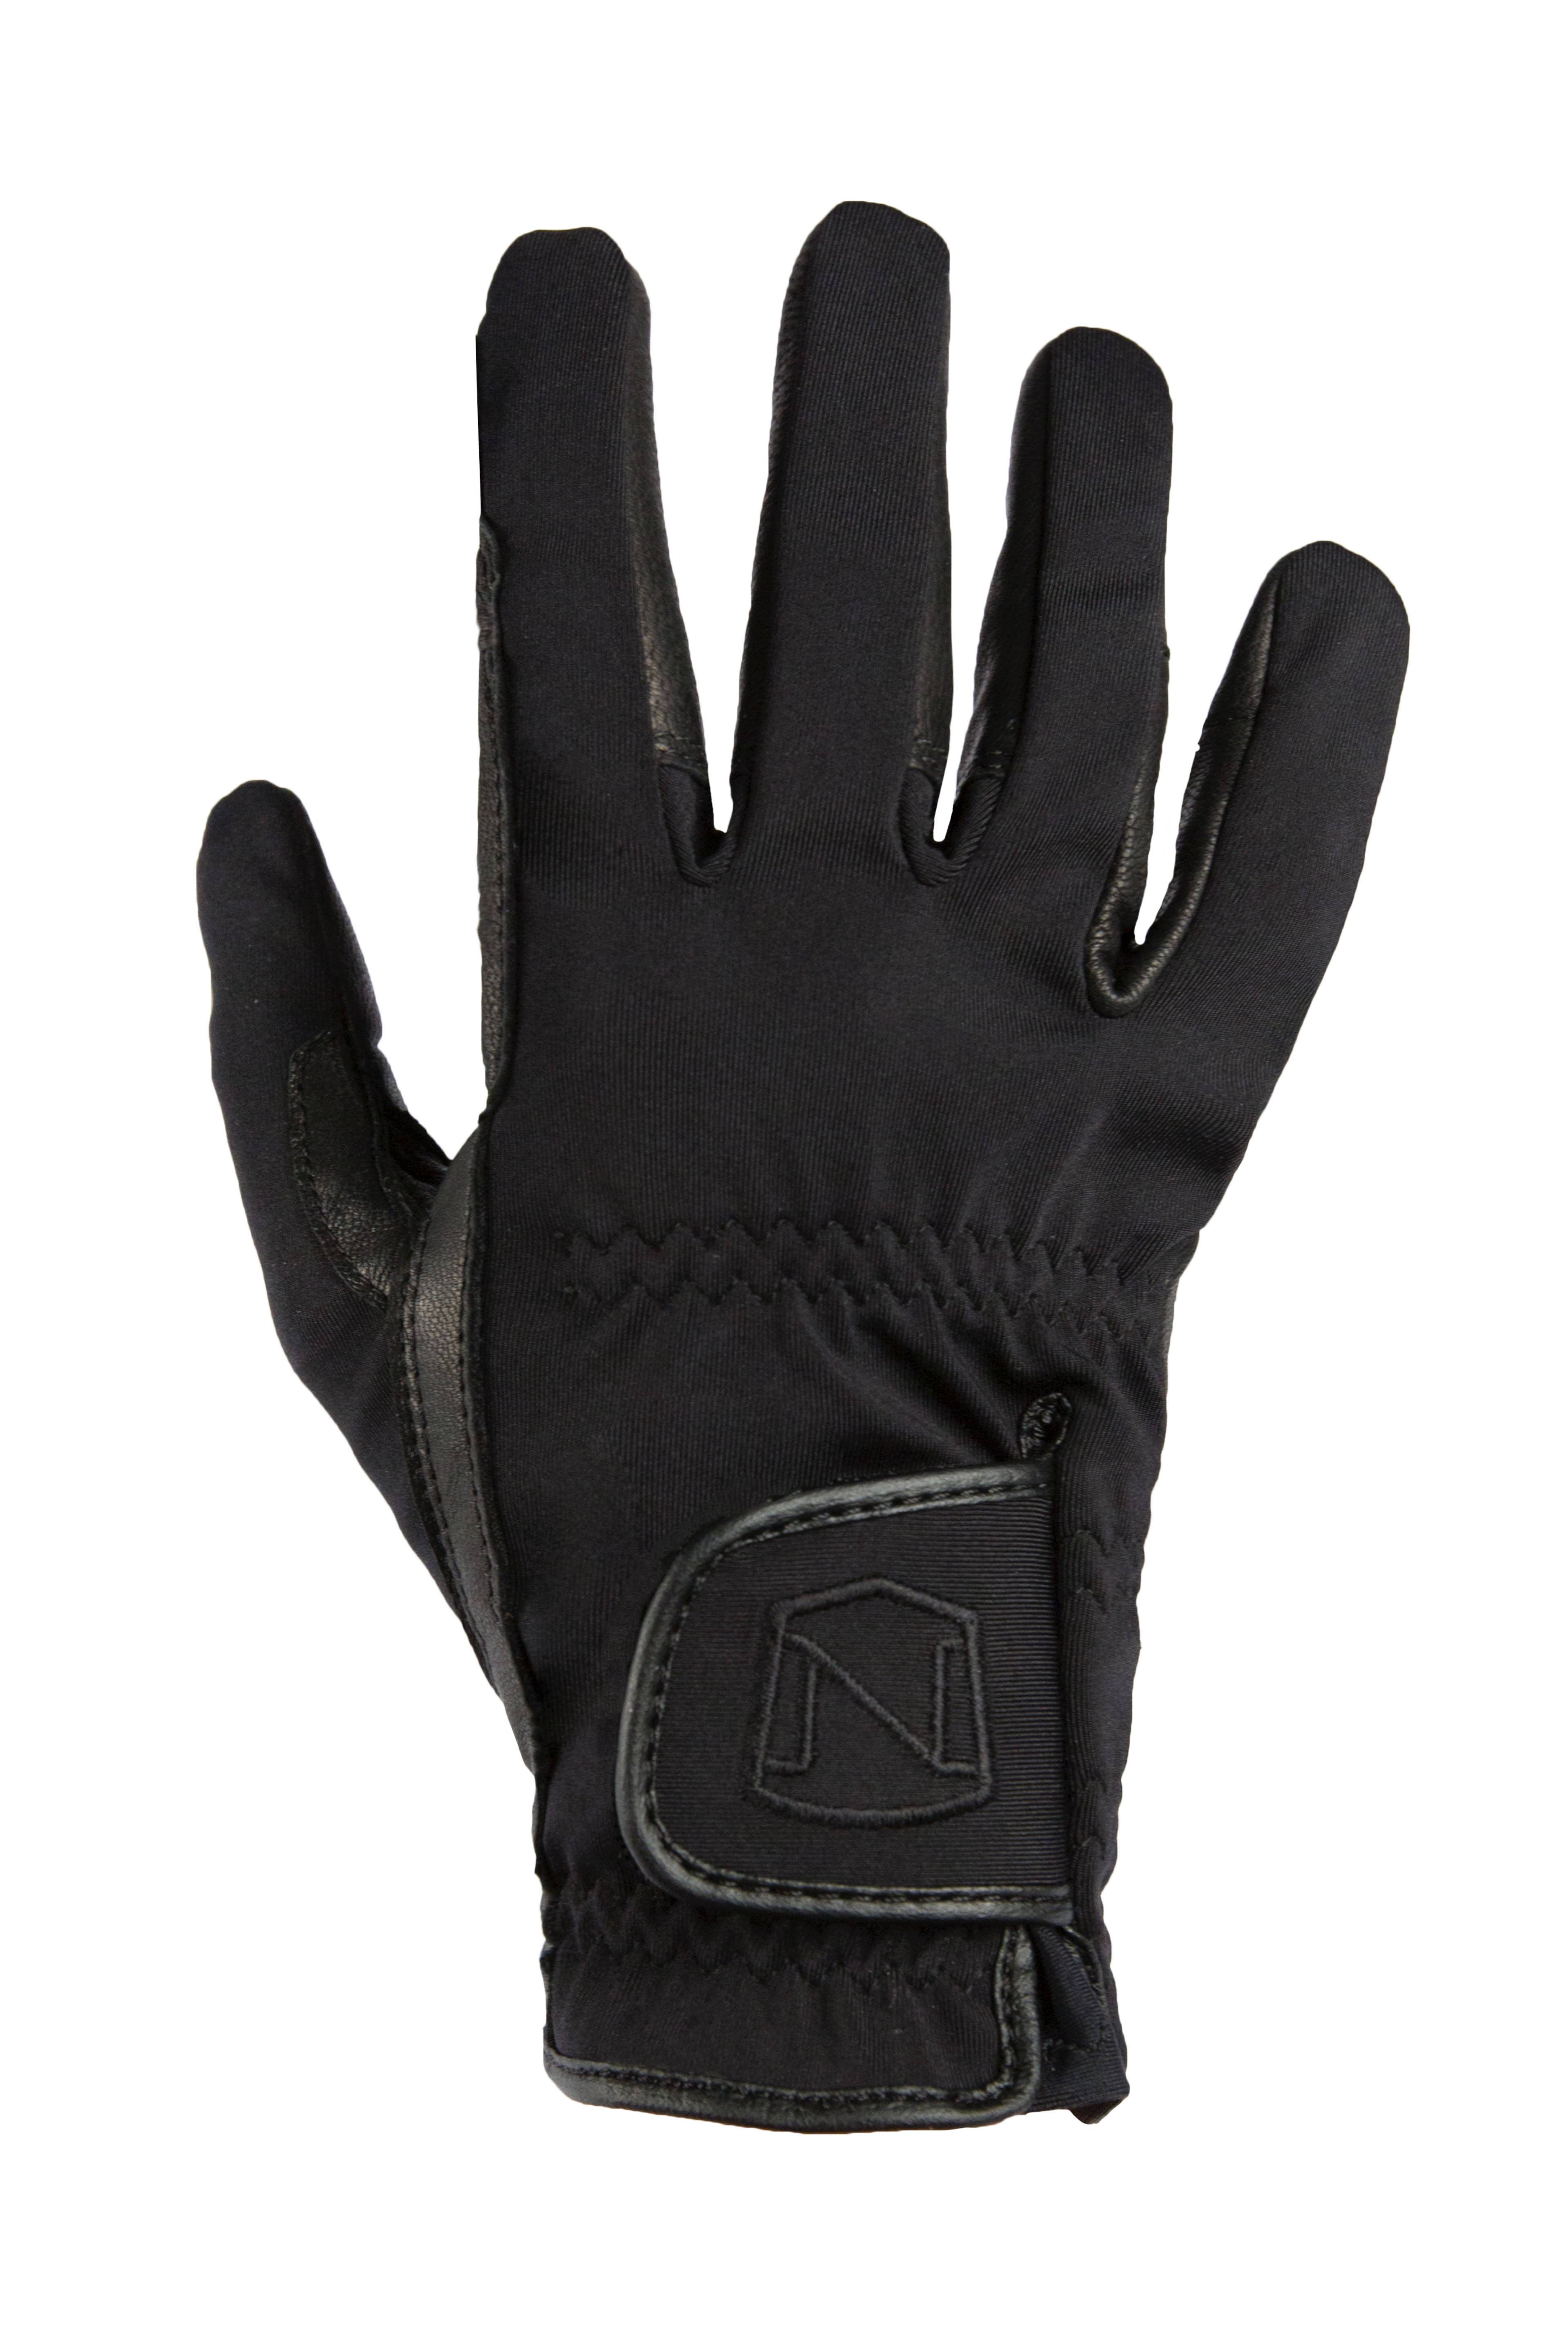 Noble Outfitters Winter Show Glove 